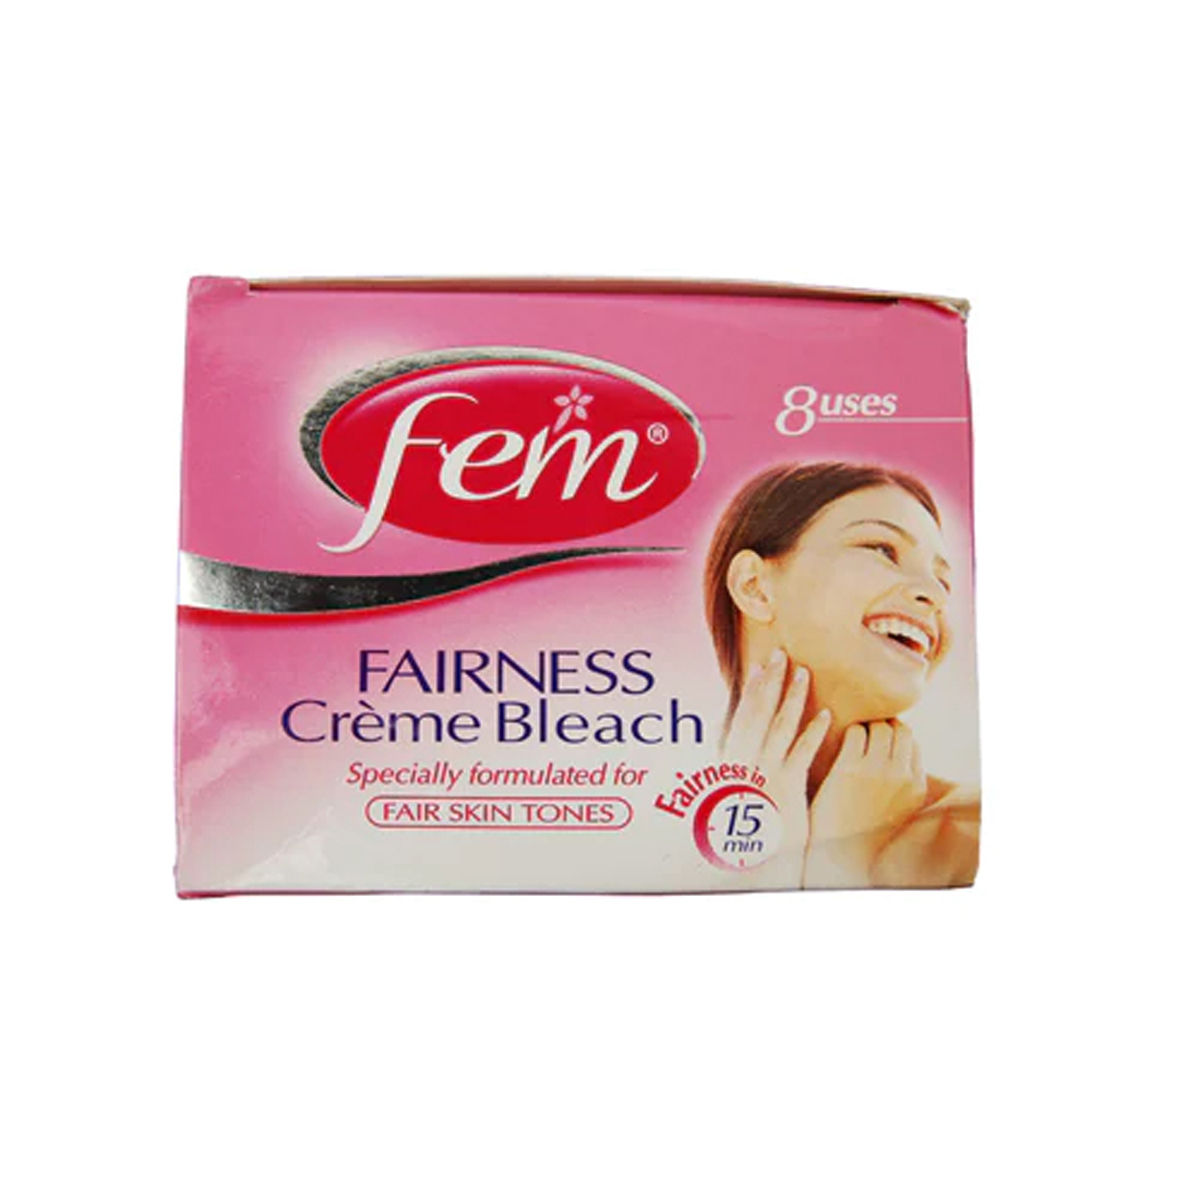 Fem Fairness Cream Bleach, 64 gm Price, Uses, Side Effects, Composition -  Apollo Pharmacy